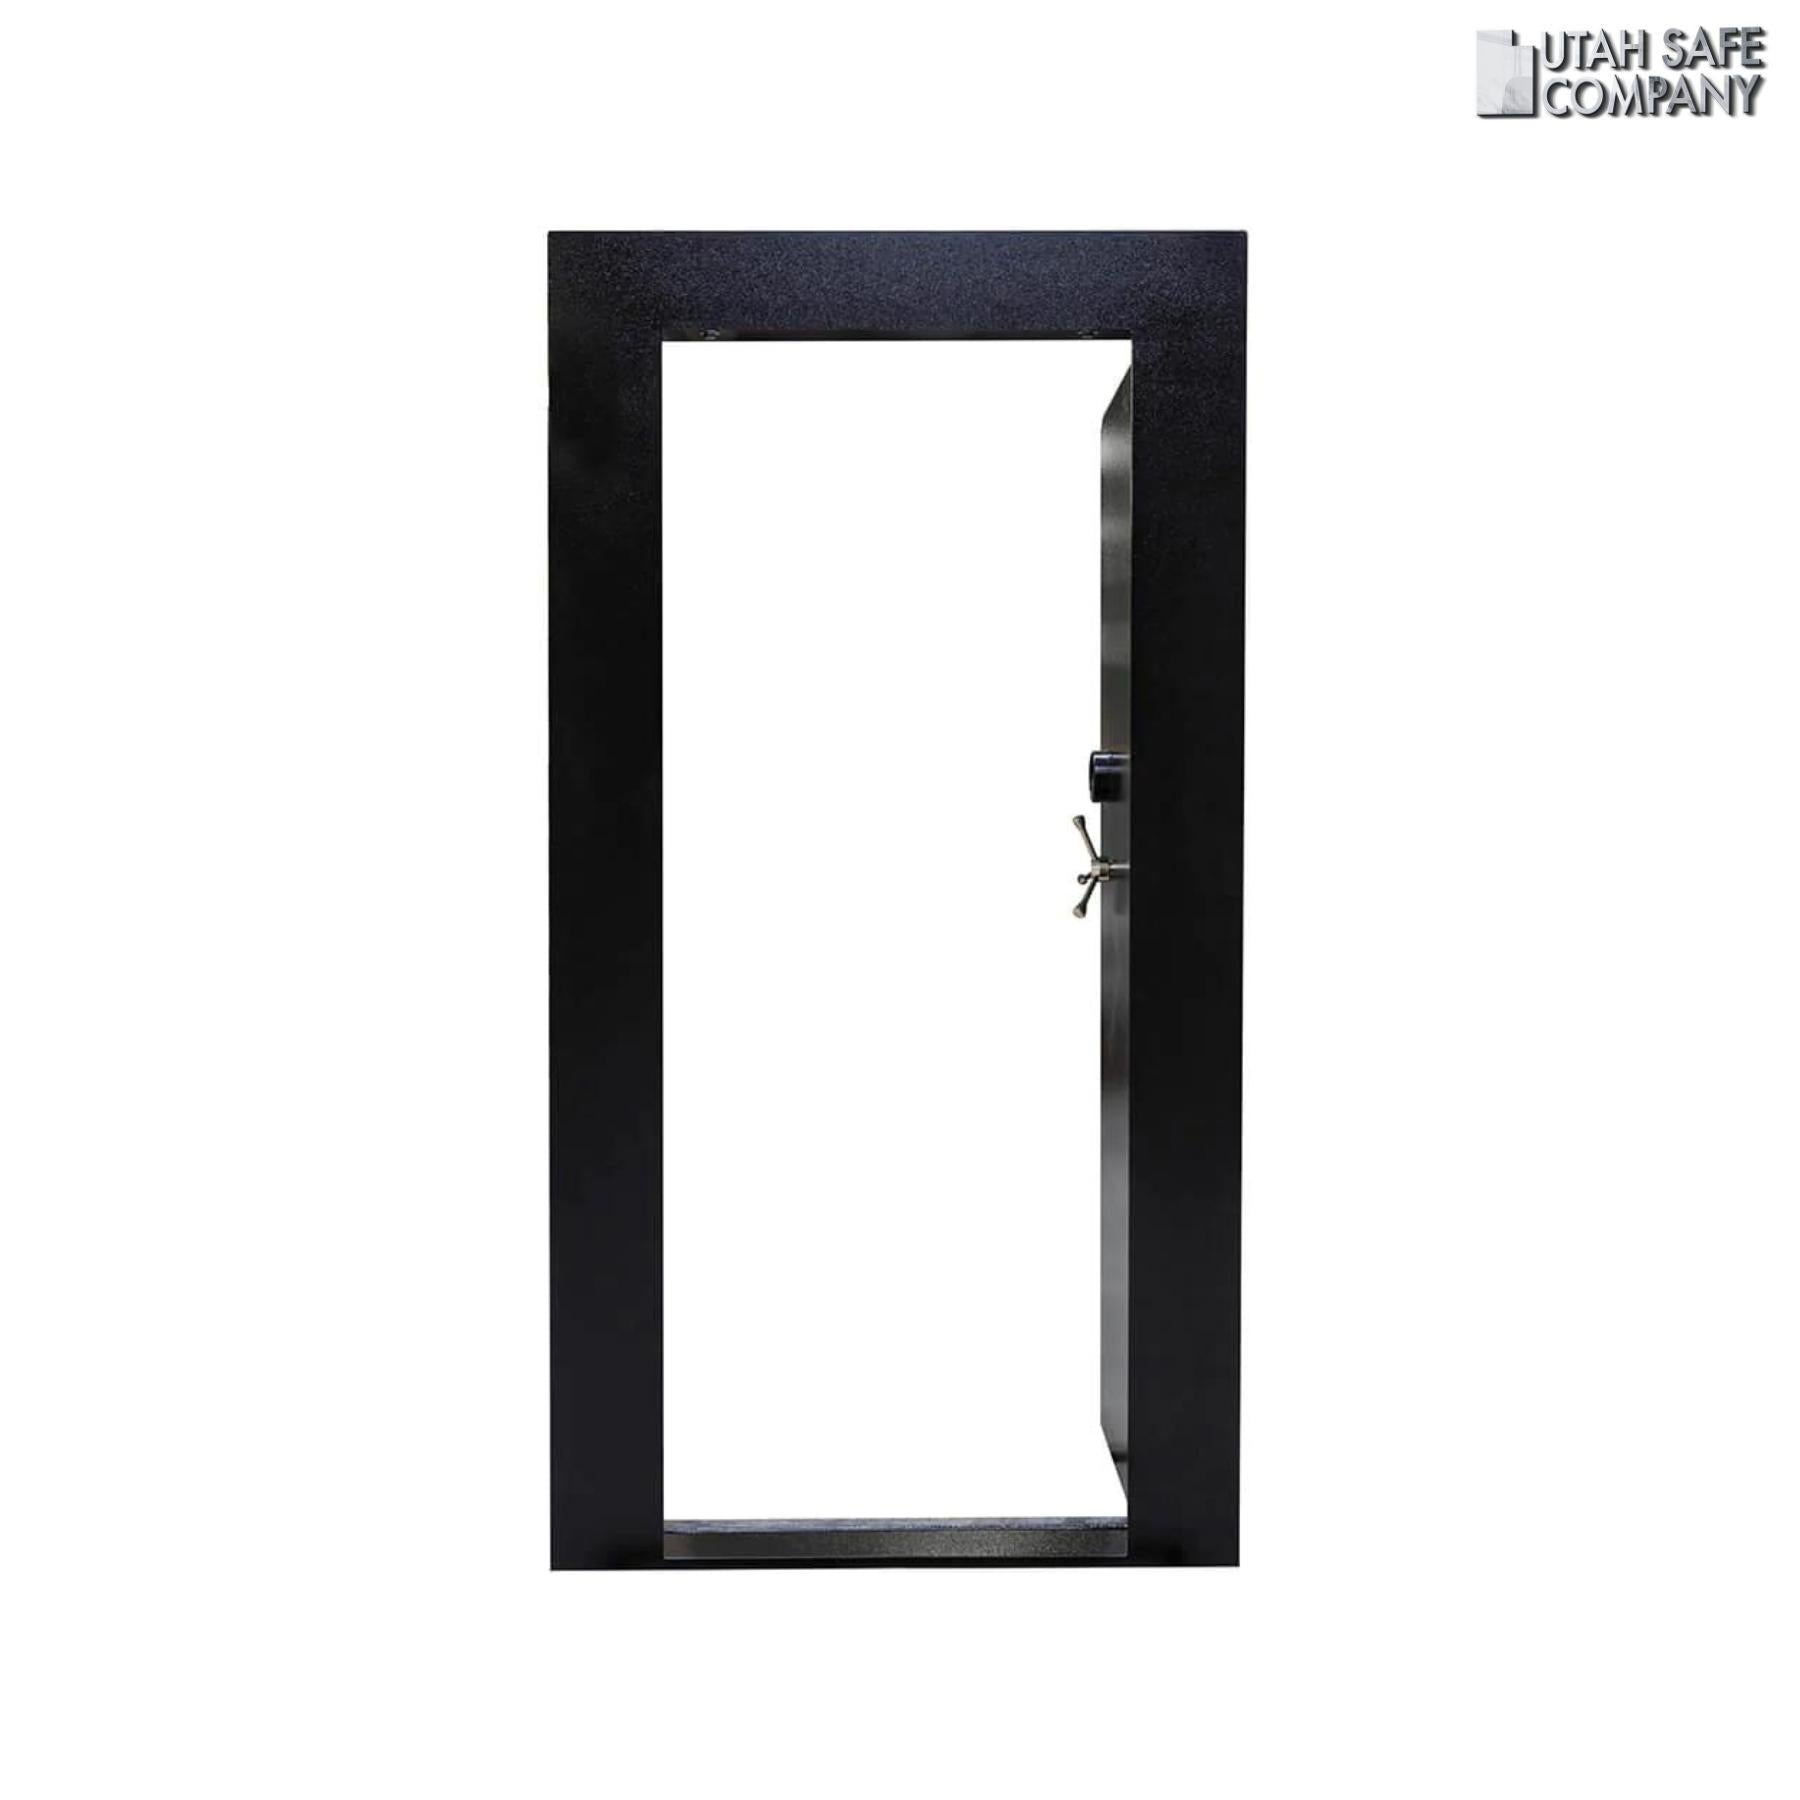 Liberty Out-Swing Premium Vault Door (Either Left or Right Hinge) - Utah Safe Company